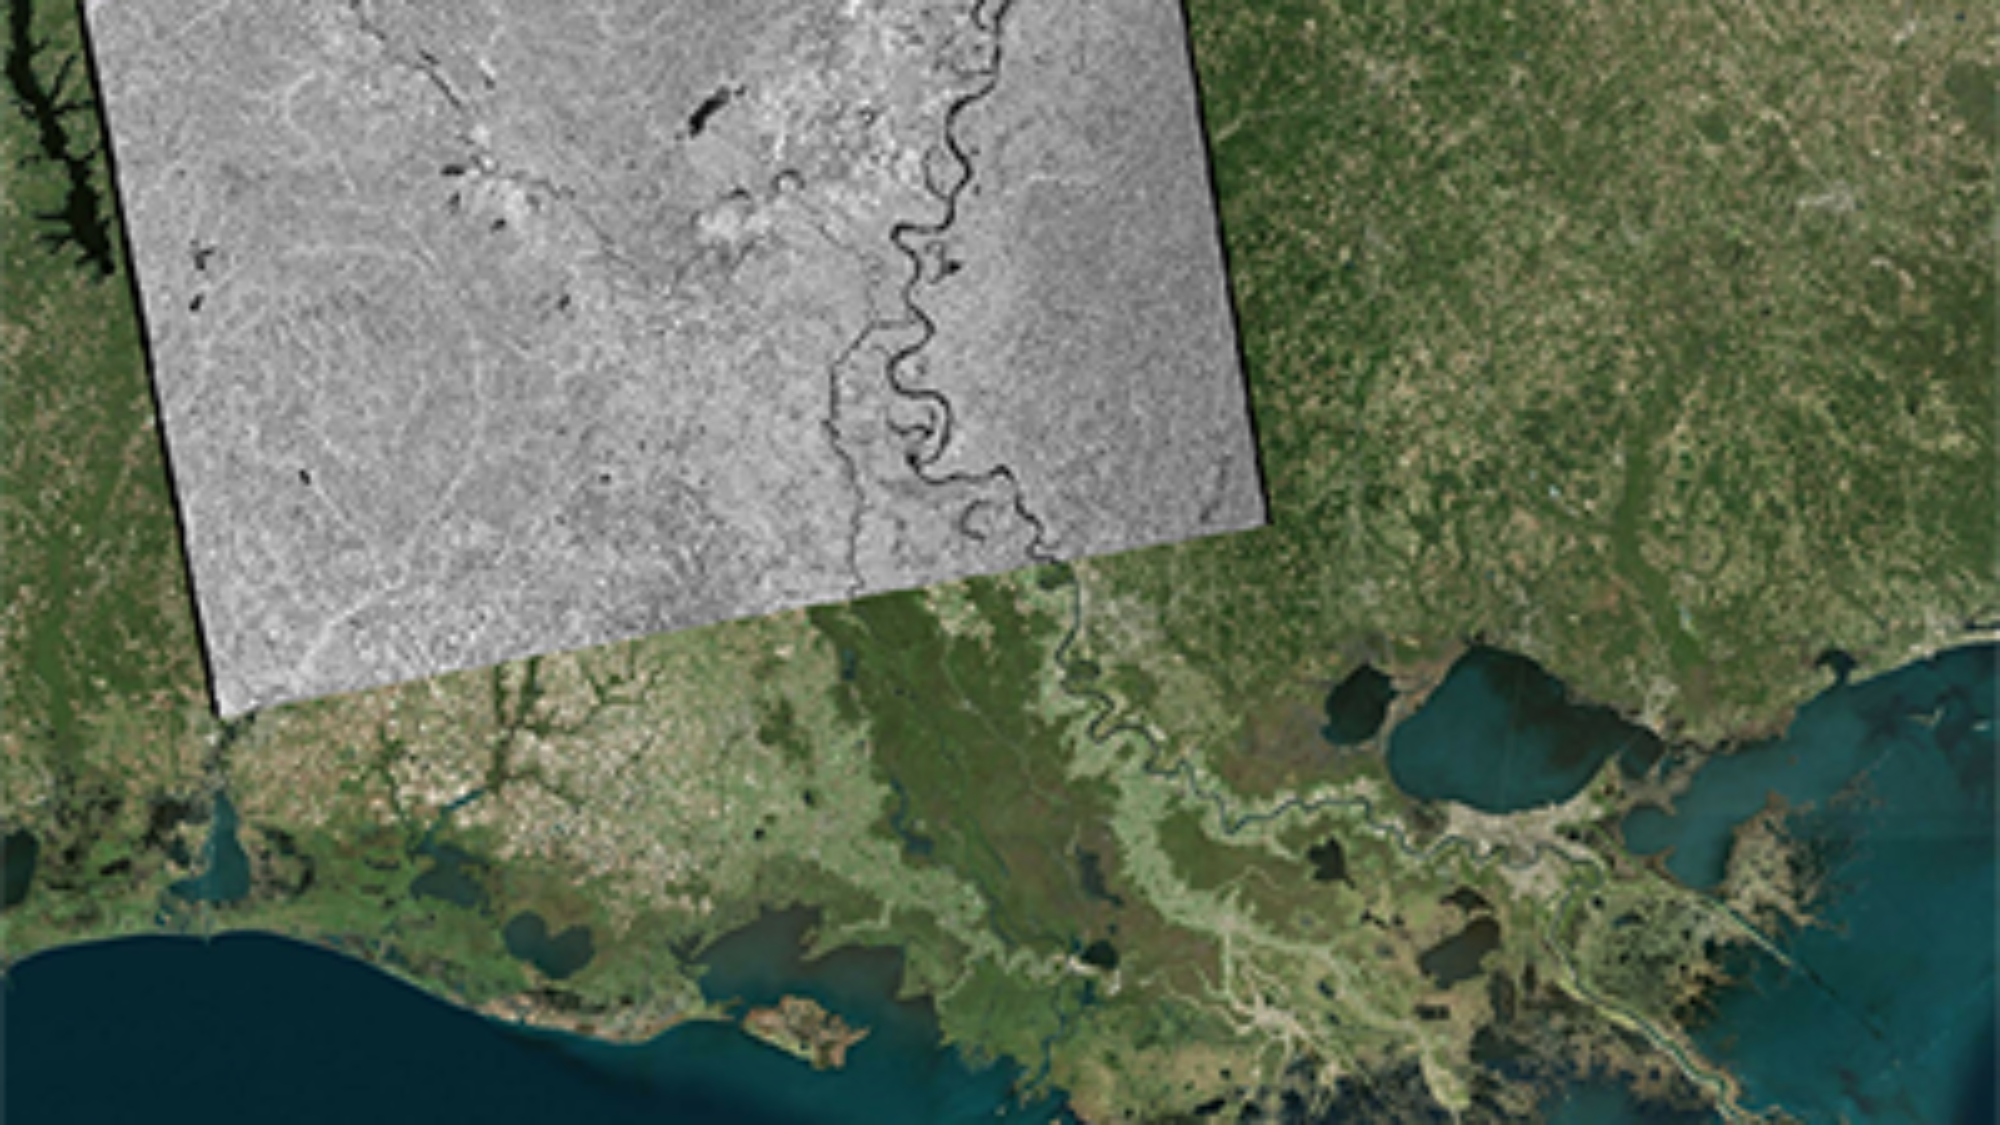 Sentinel-1 image capturing the Mississippi River has been processed into a GIS-compatible format and imported for ease of use.